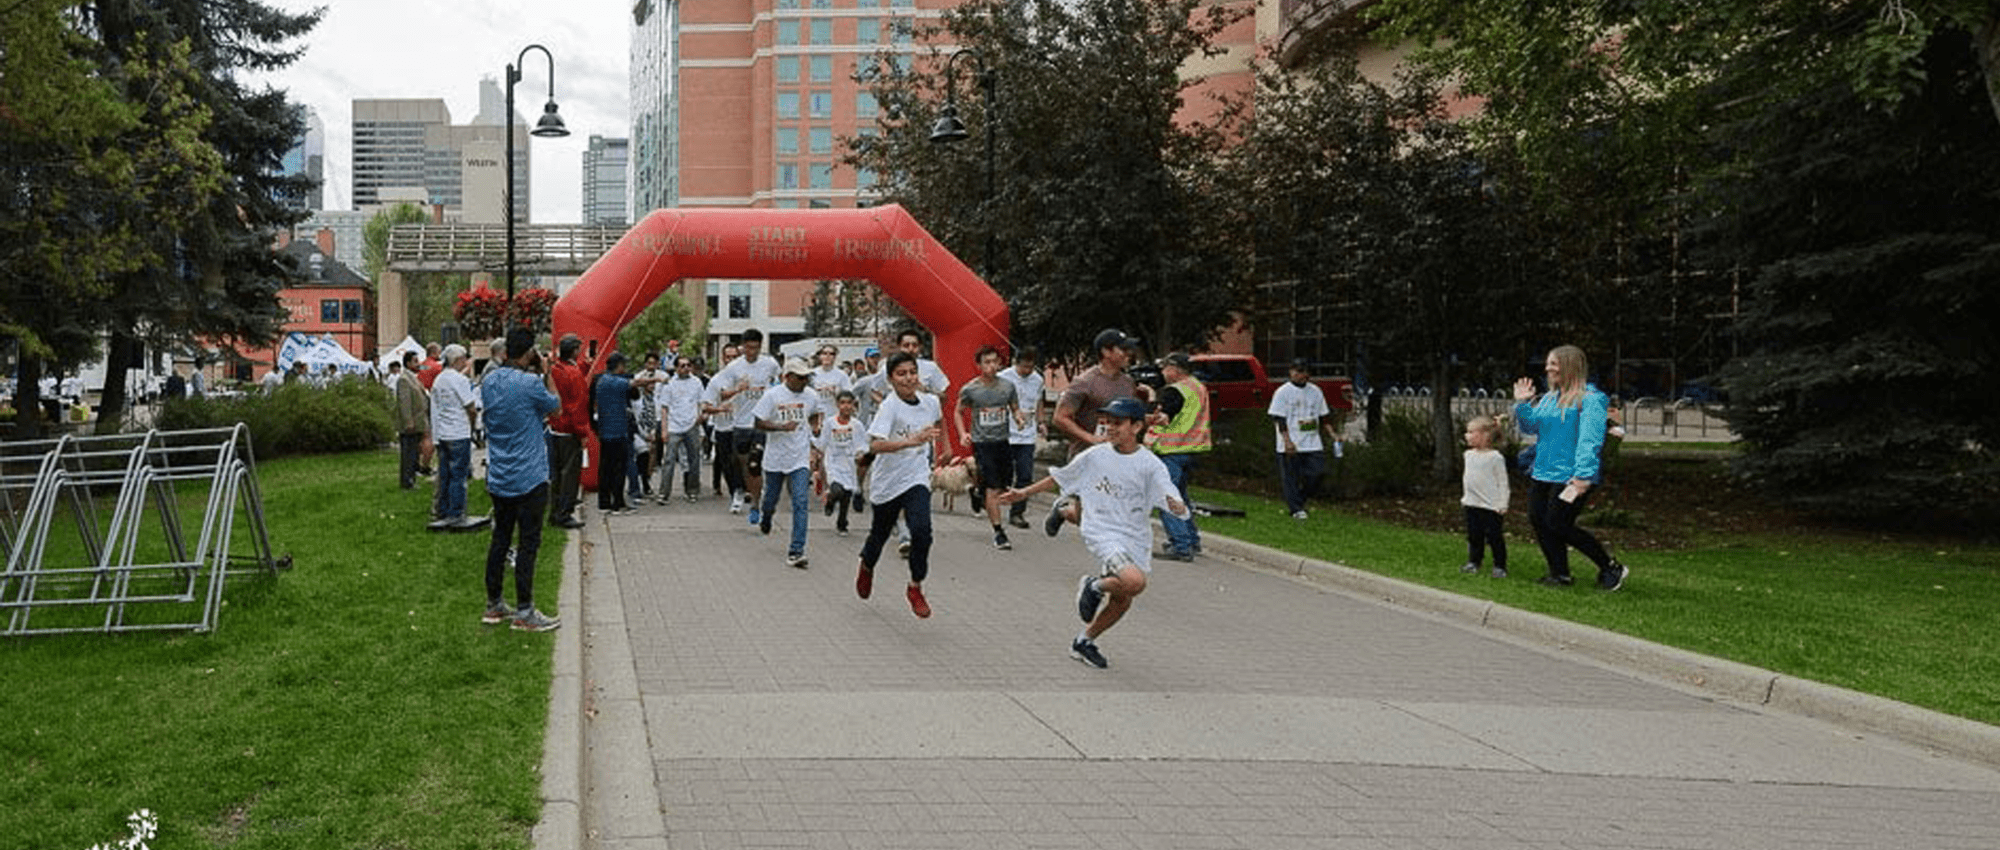 unners take off from the starting line during last year’s Run for Calgary event on Sept.14, 2019